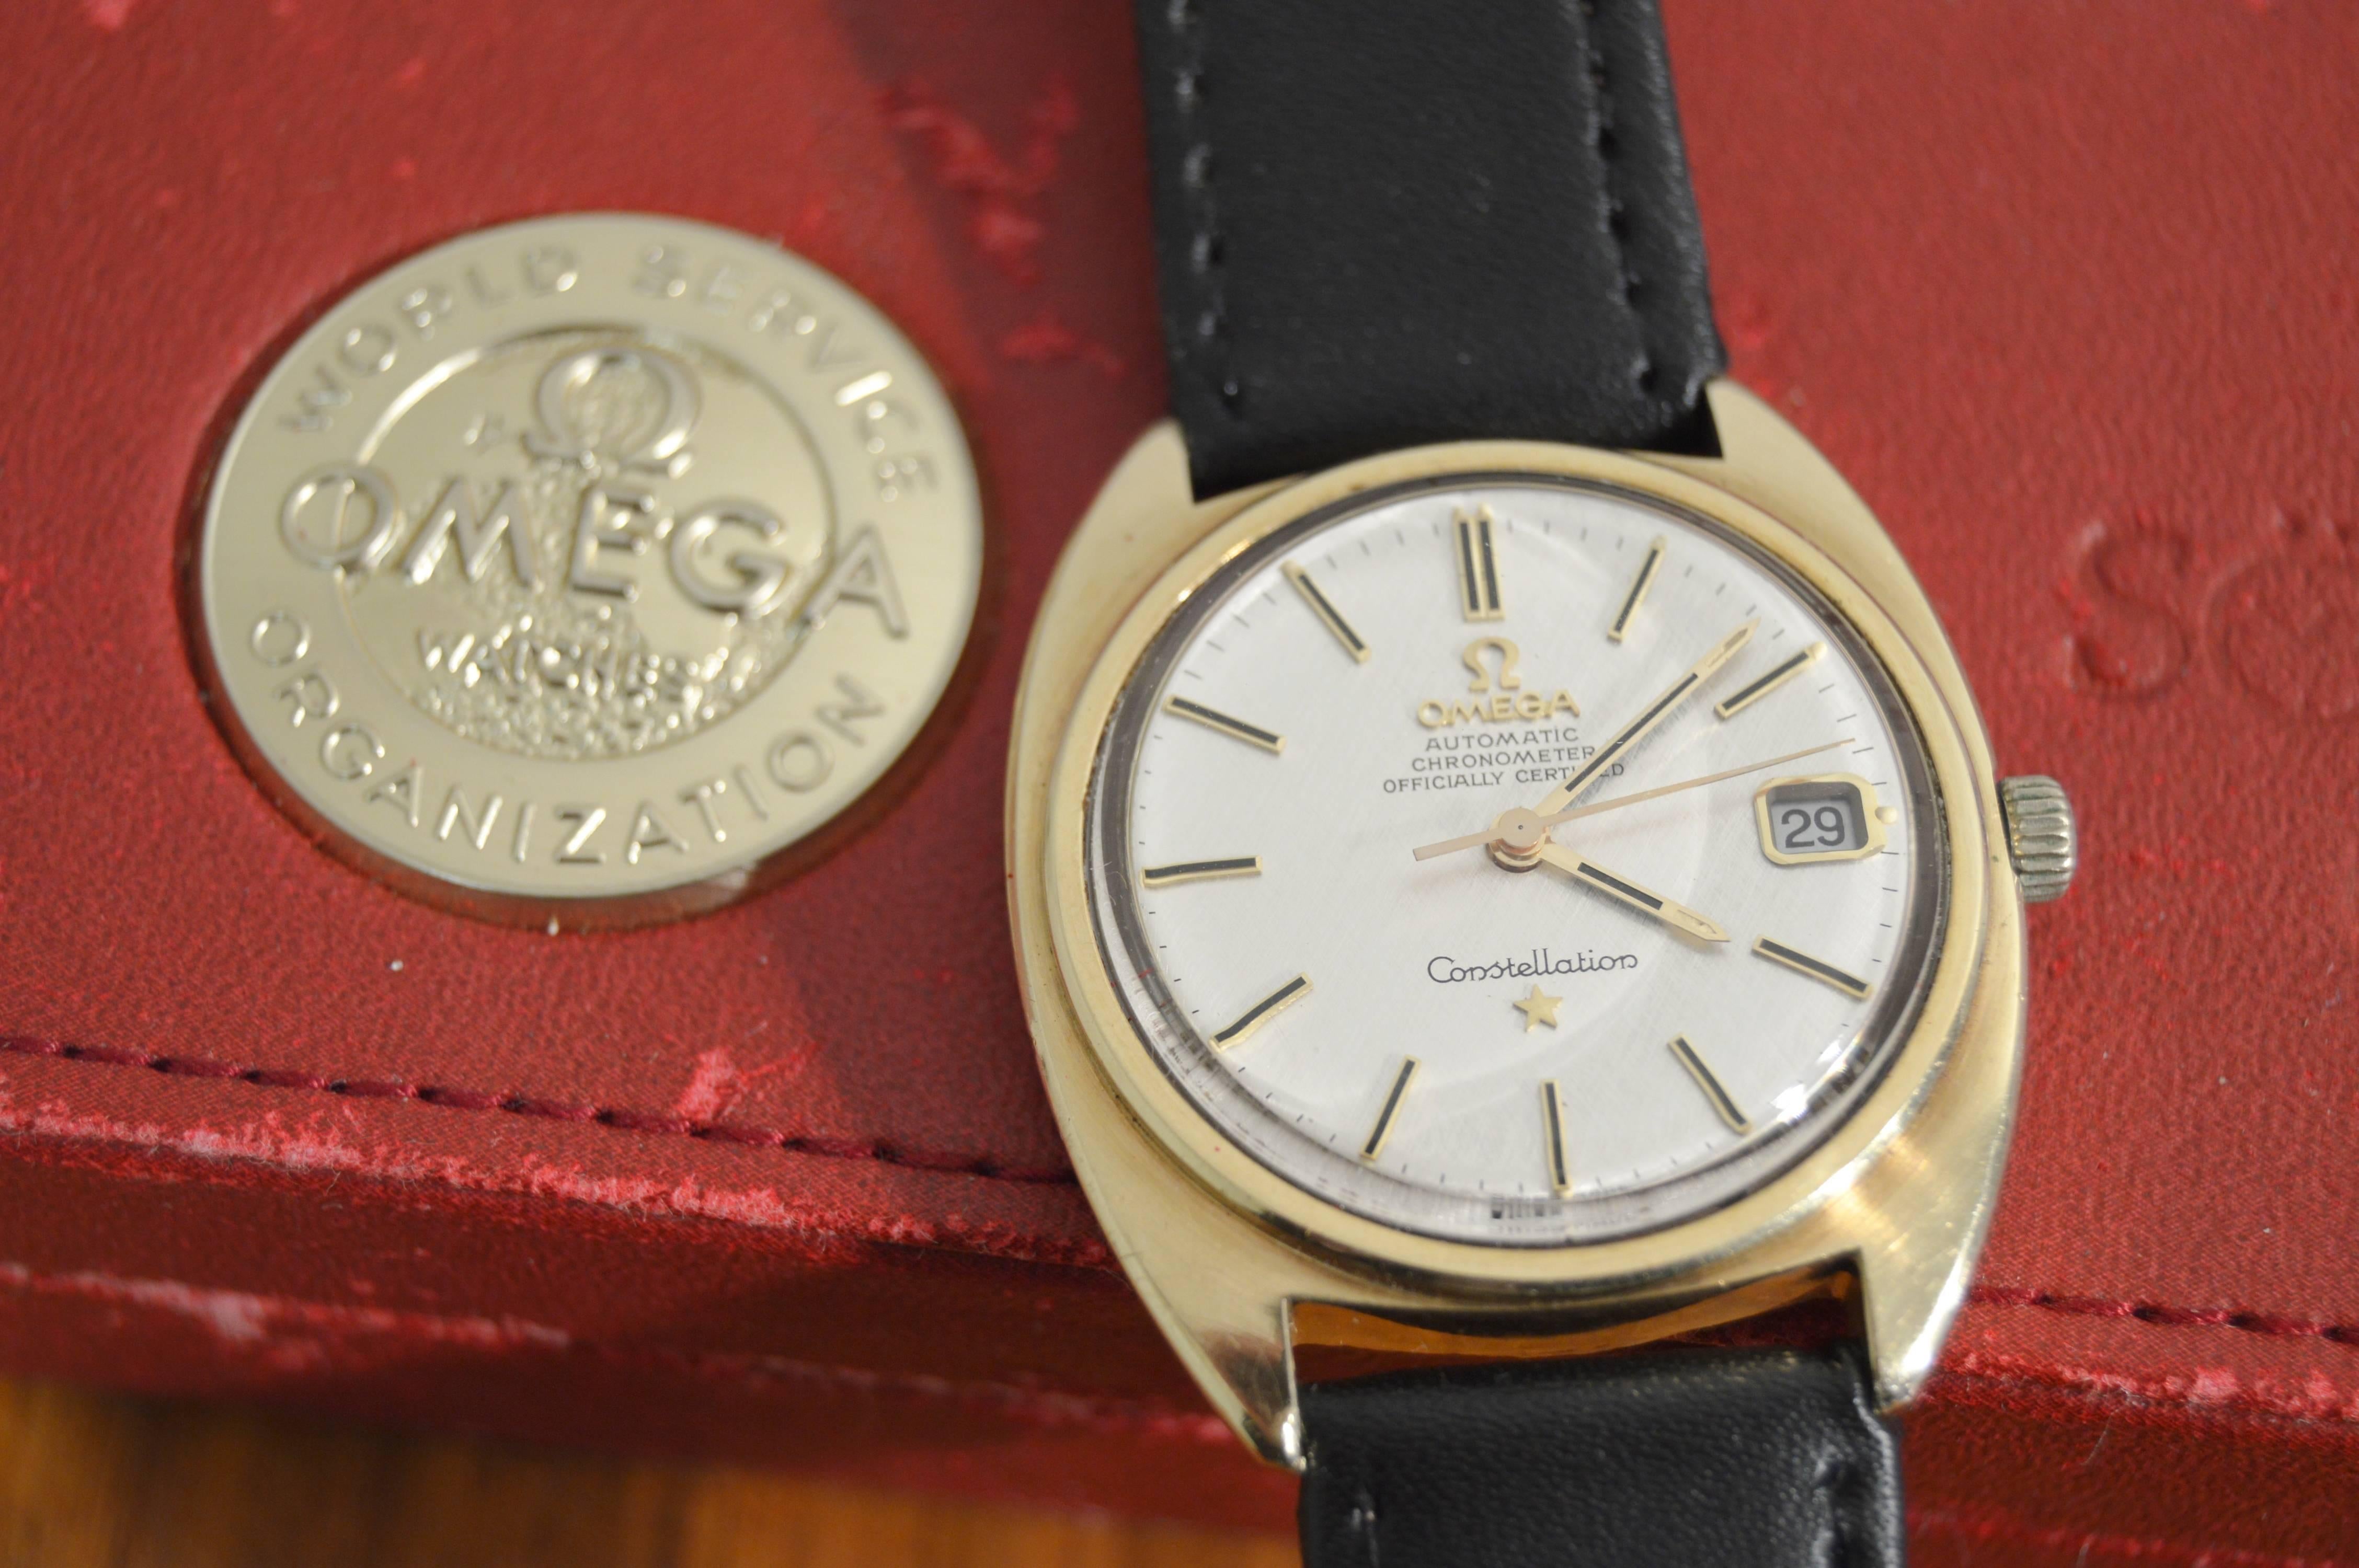 Nice omega constellation automatic from year 1970.
Caliber 564-1
Measures: Width 35 mm (excluding the crown)
Gold on stainless steel back
Box included

This watch is near 50 years old and in very good condition. It has unknown service history